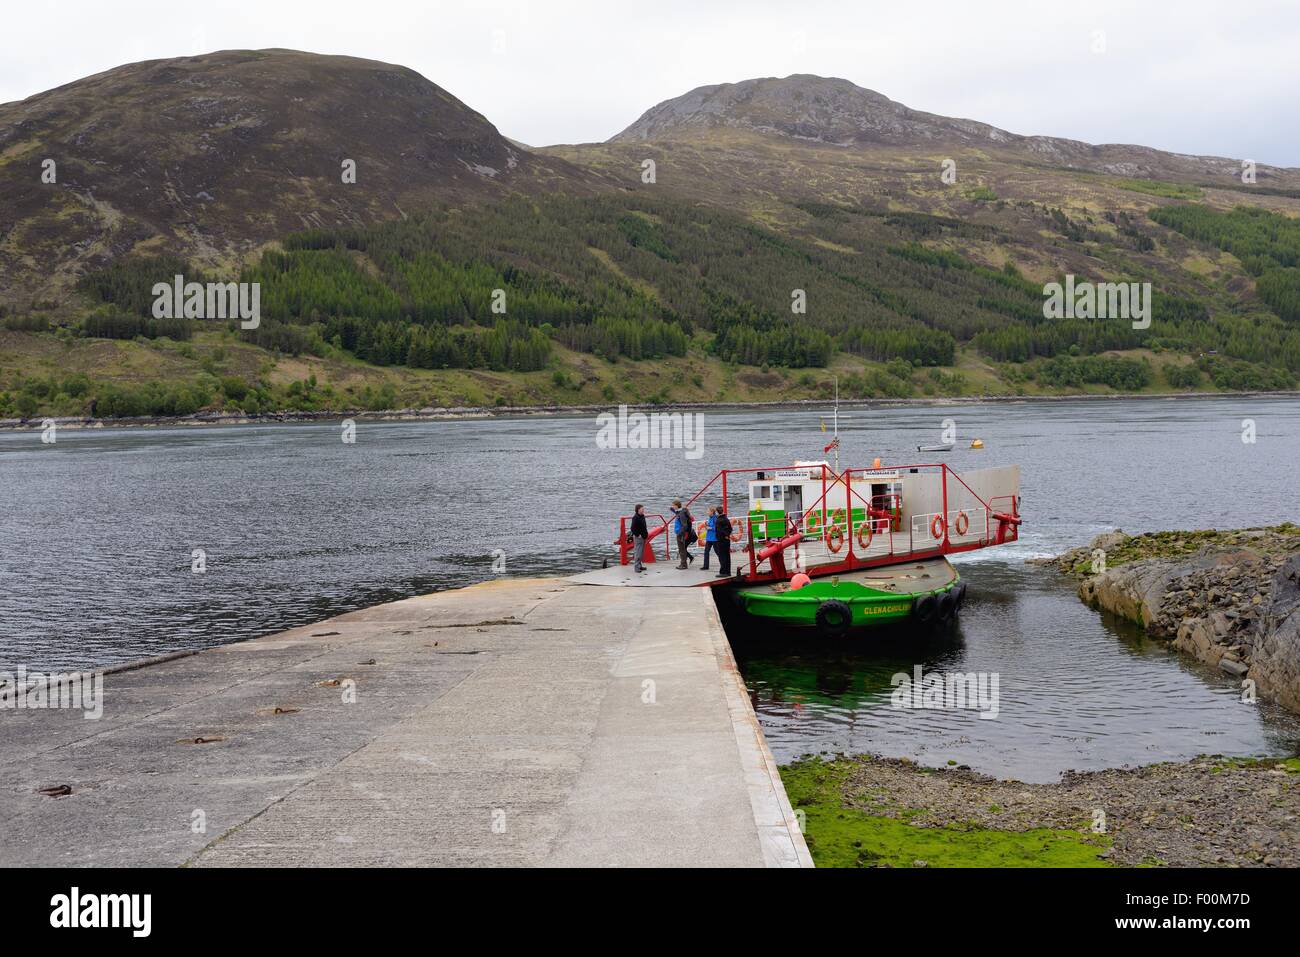 Passengers disembarking the Glenelg Ferry after crossing from the Isle of Skye, Western Isles, Scotland. Stock Photo